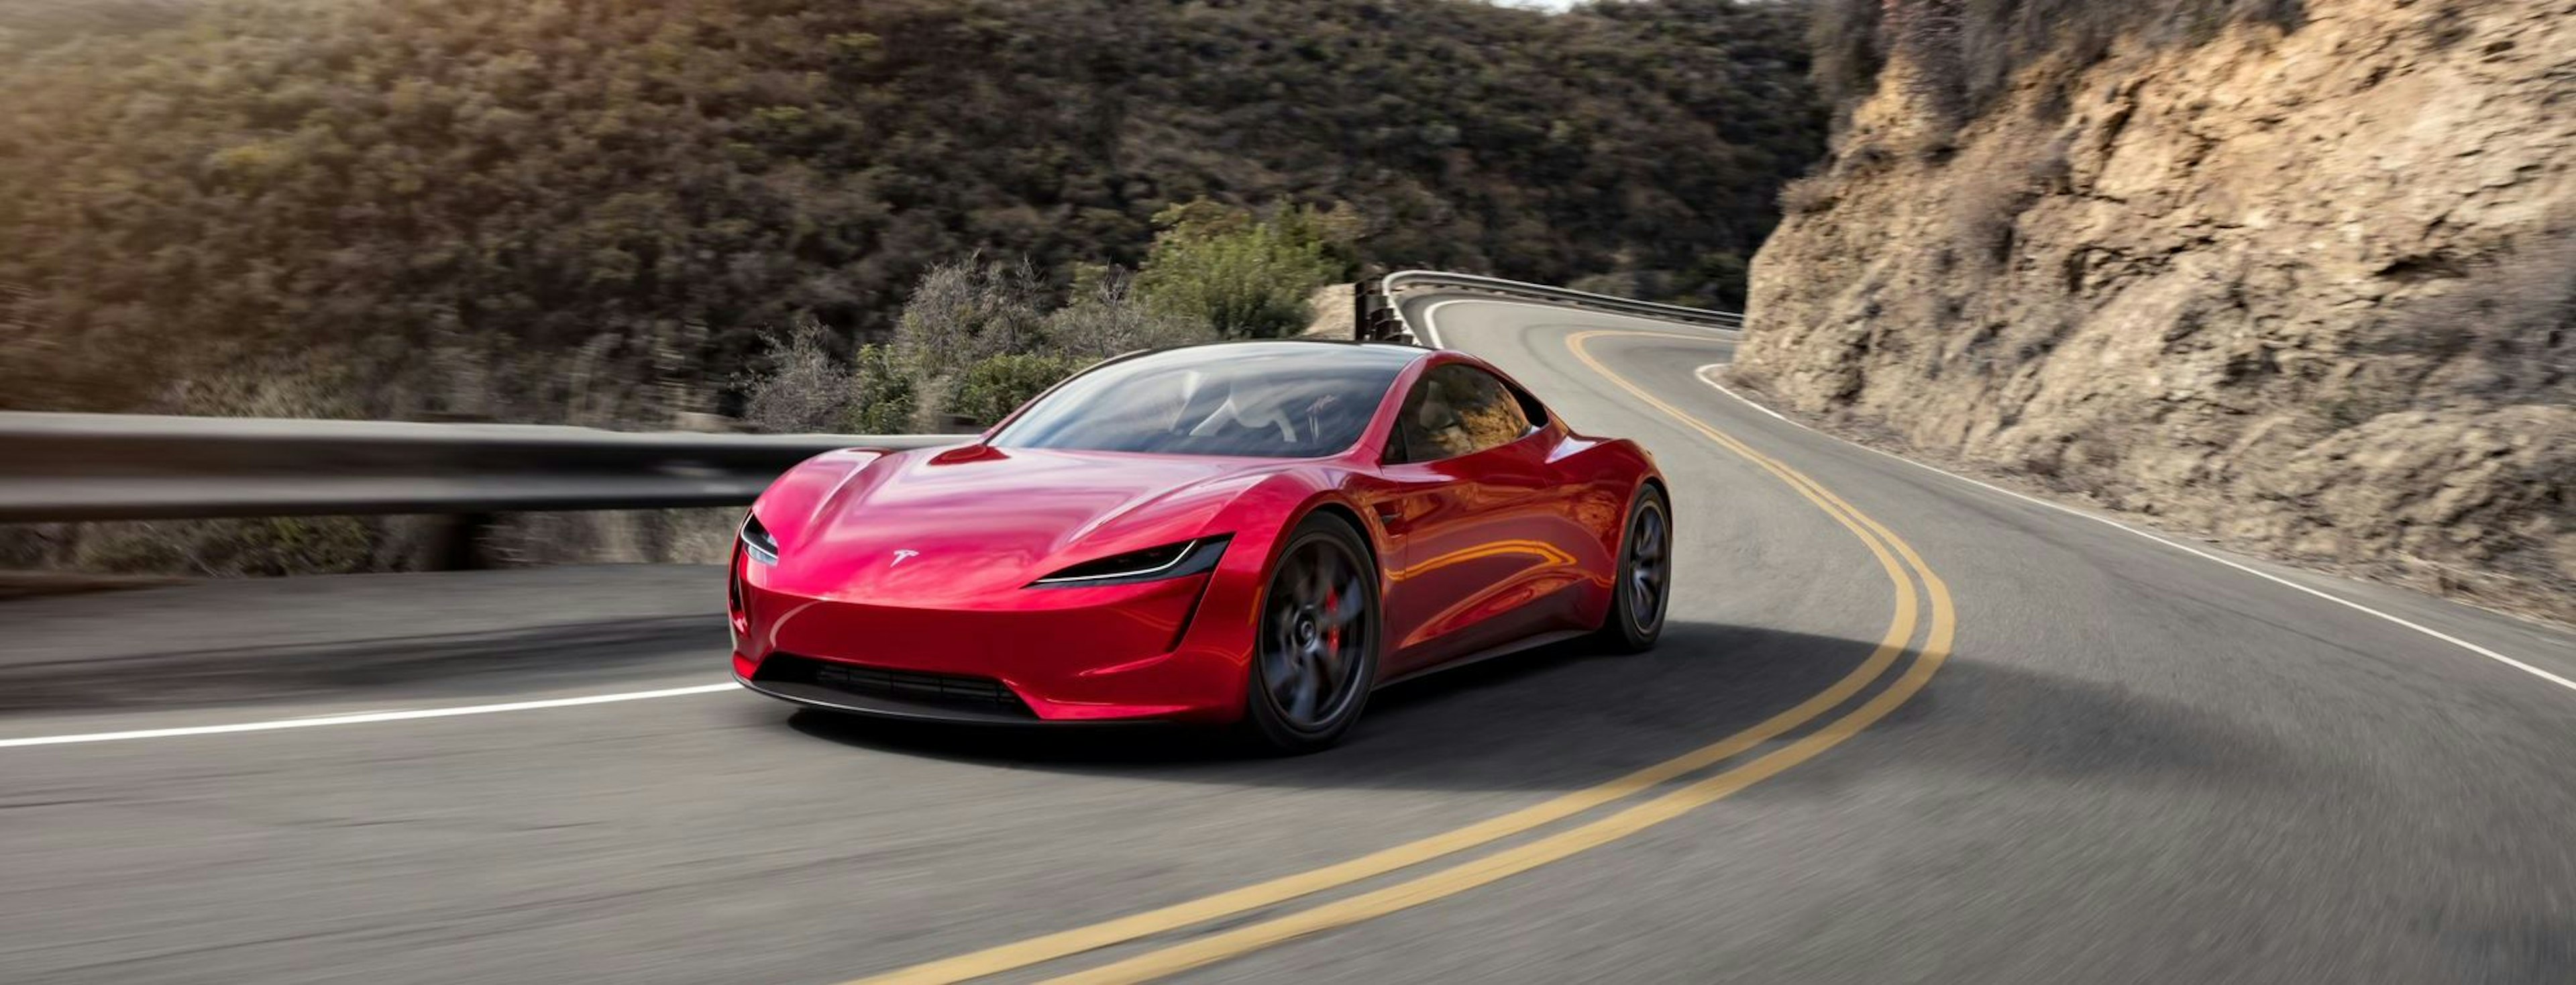 https://images.sifted.eu/wp-content/uploads/2020/09/04123051/Tesla-Roadster-1.jpeg?auto=format&fit=max&w=3840&q=75